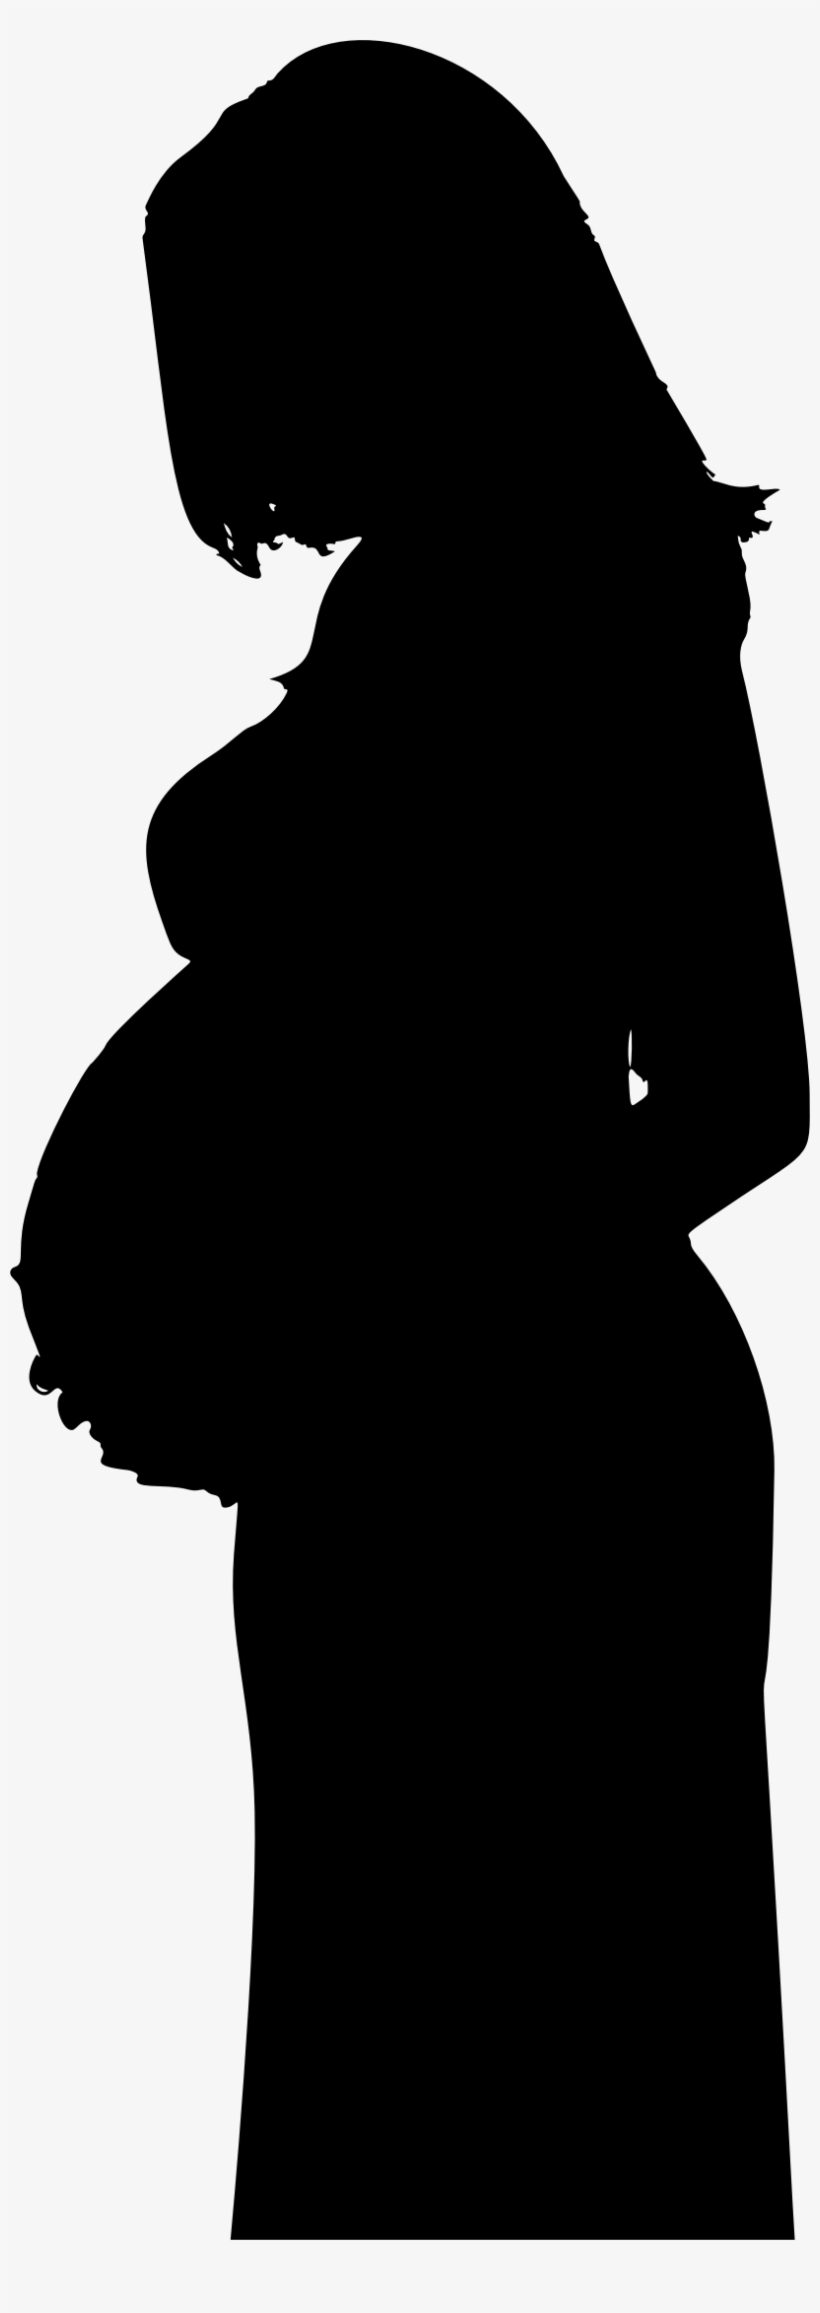 Pregnant Silhouette Png Download - Mother Silhouette, transparent png #4118114